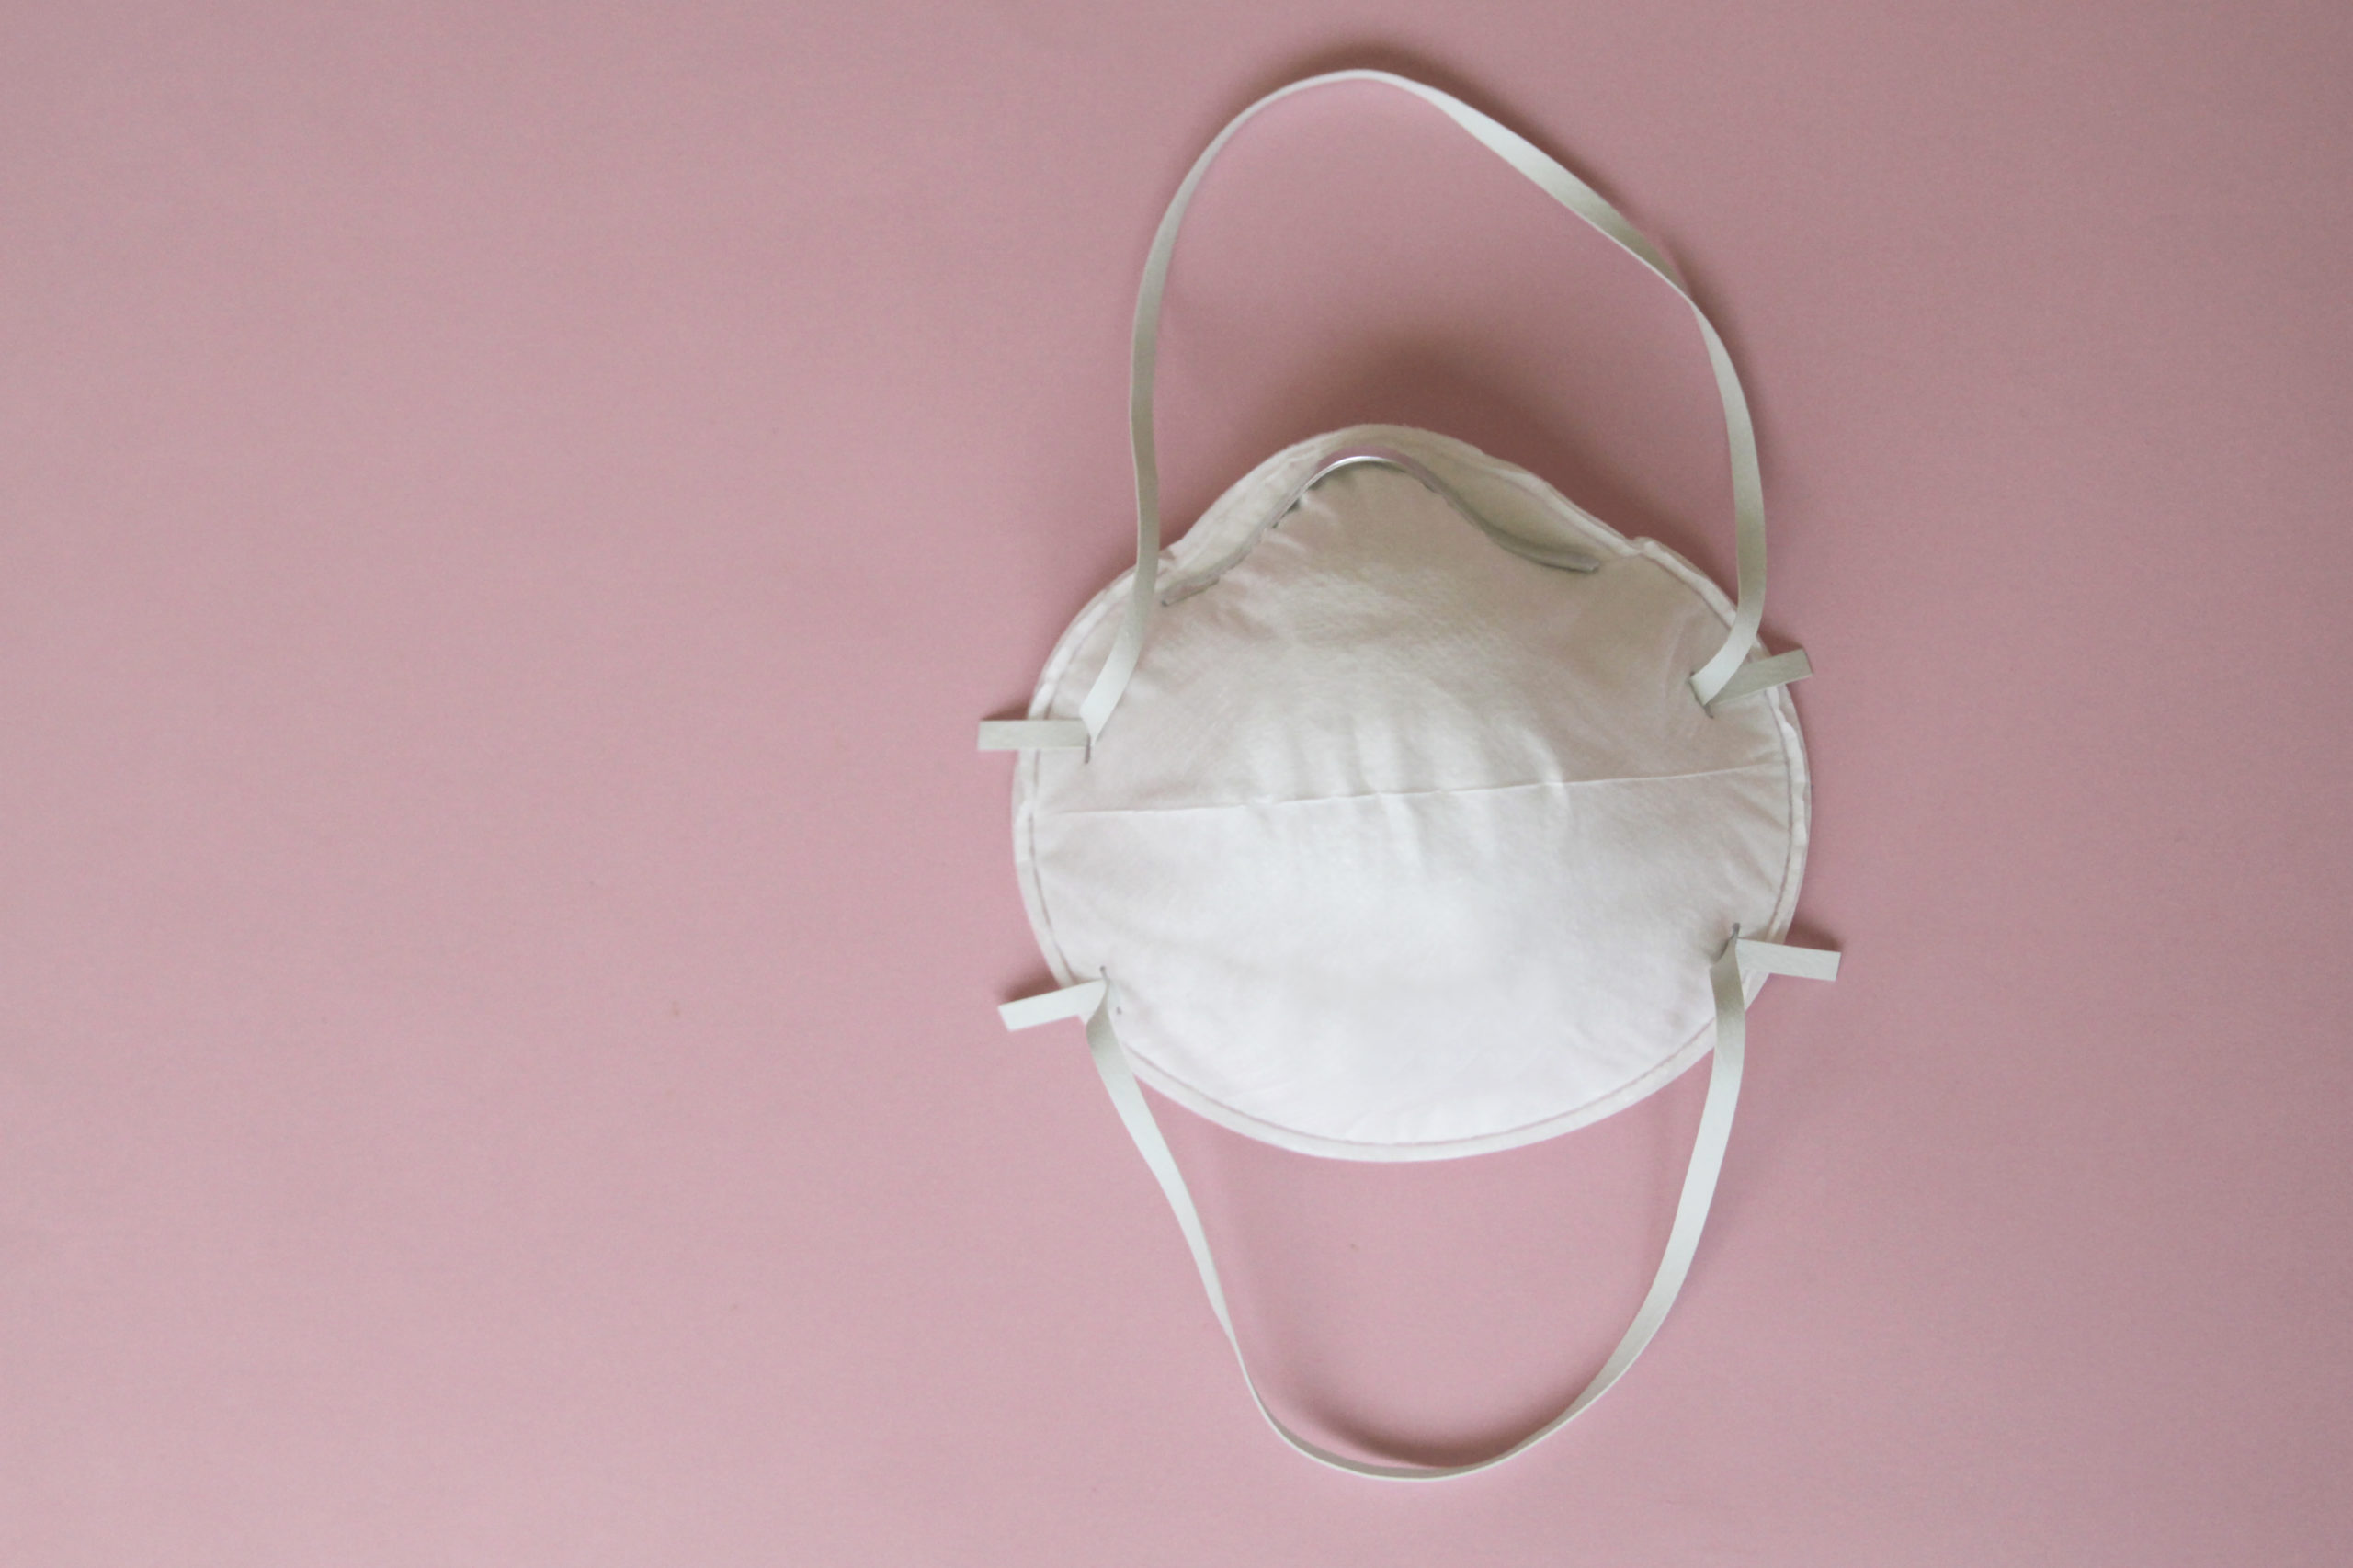 CDC Shares Two New Guidelines On Face Masks That May Help Slow Spread Of COVID-19